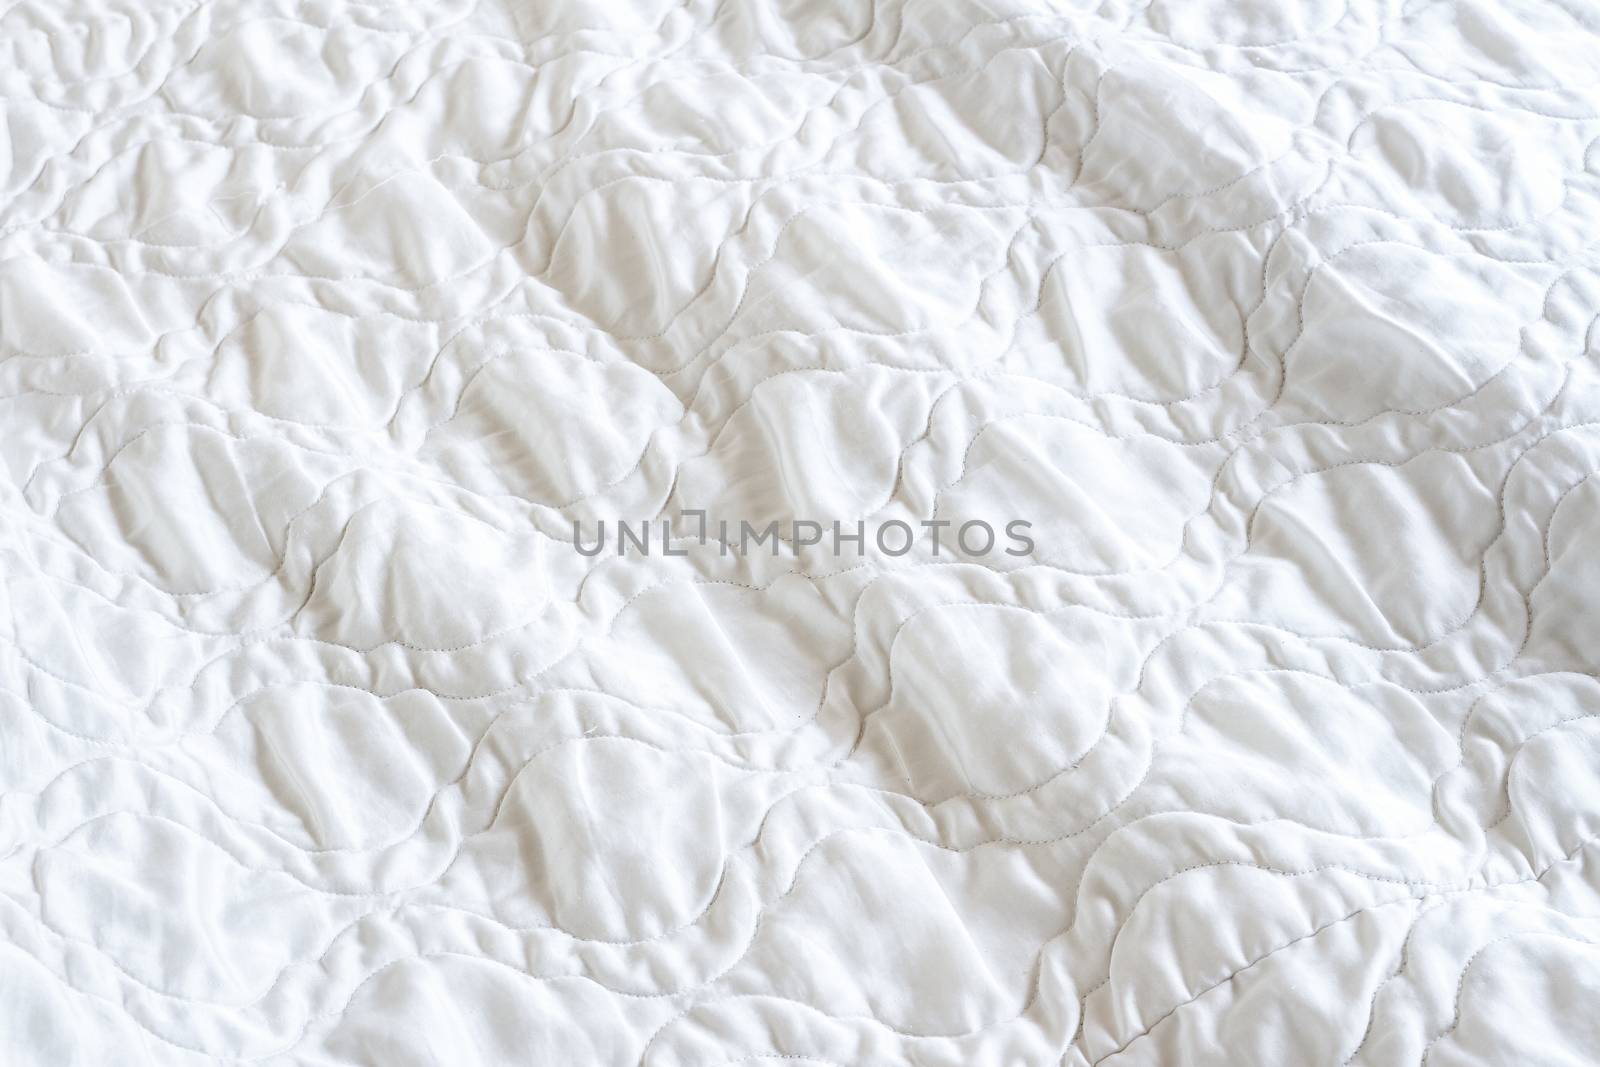 Close-up of Crumpled white blanket